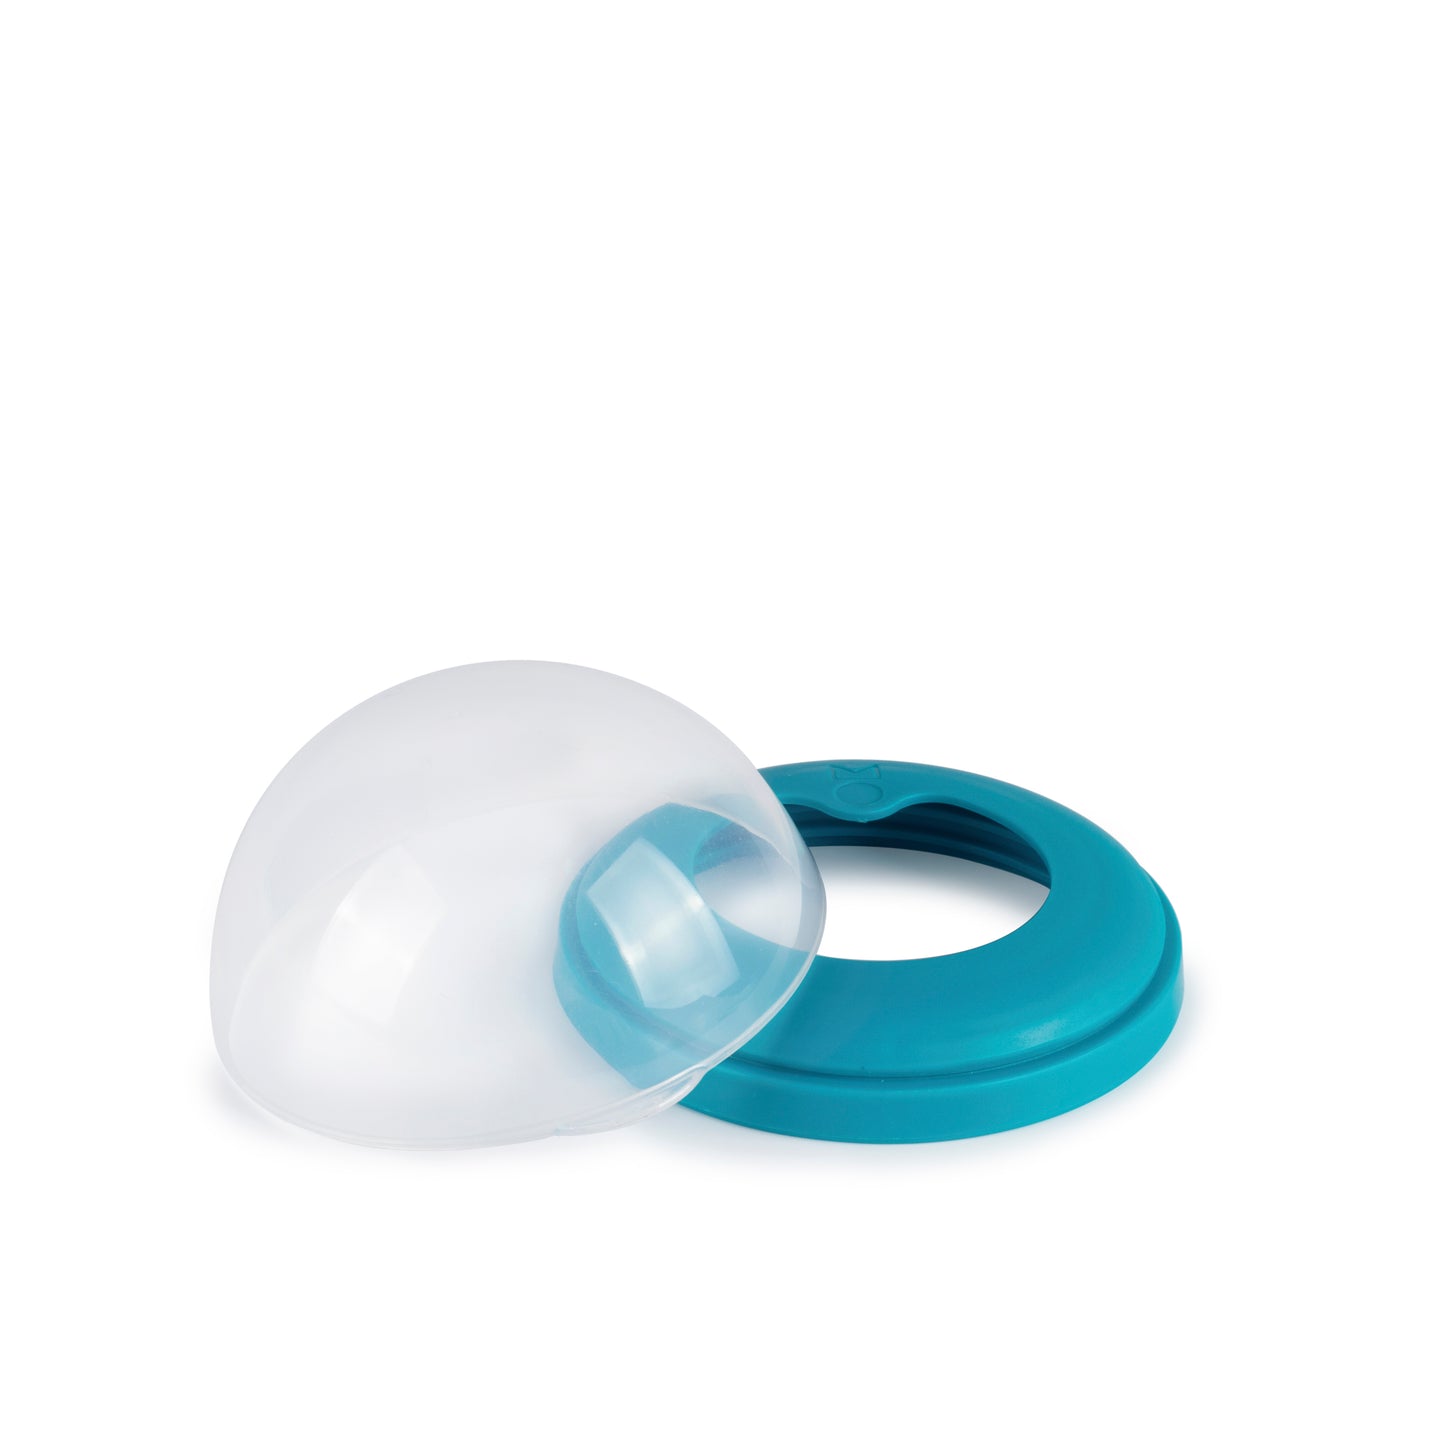 ALICE replacement ring and lid set-teal